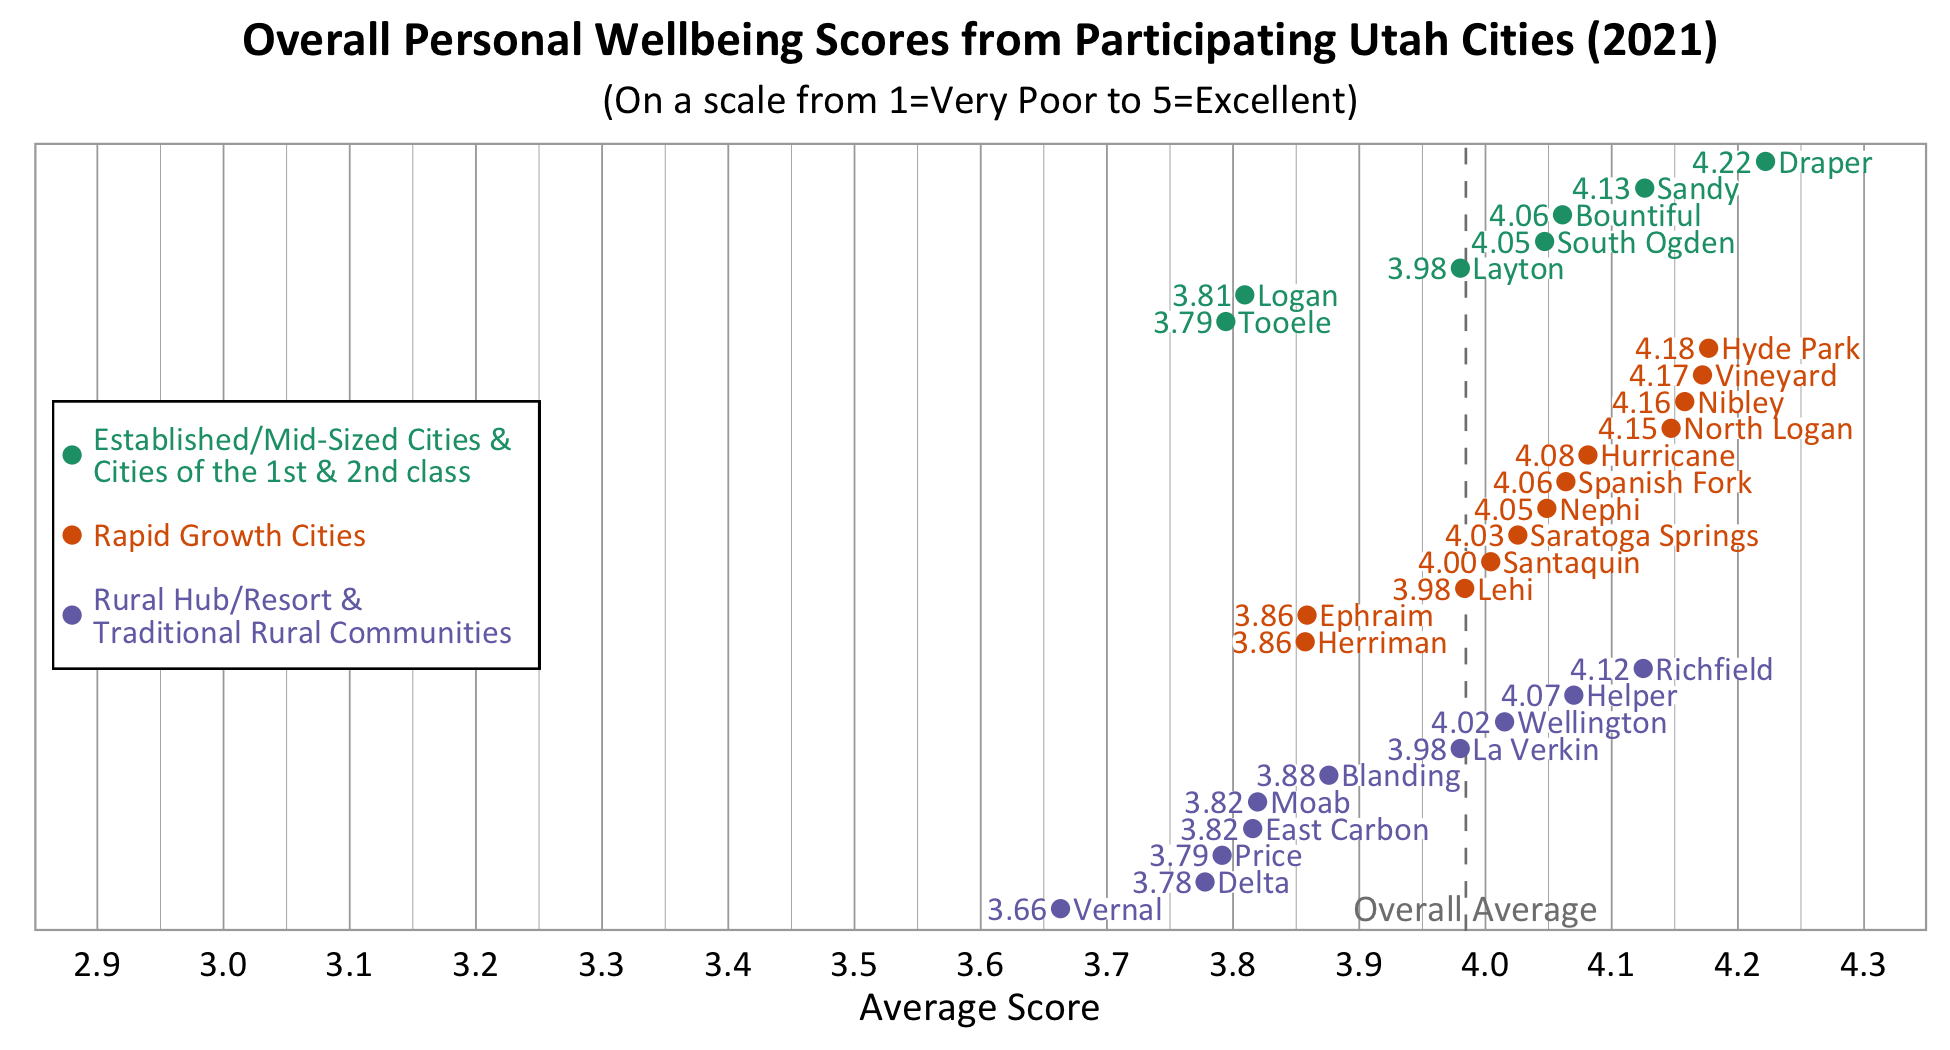 Dot Plot. Title: Overall Personal Wellbeing Scores from Participating Utah Cities (2021). Subtitle: (On a scale from 1=Very Poor to 5=Excellent). Group: Established/Mid-Sized Cities. Draper: Average Score 4.22; Sandy: Average Score 4.13; Bountiful: Average Score 4.06; South Ogden: Average Score 4.05; Layton: Average Score 3.98; Logan: Average Score 3.81; Tooele: Average Score 3.79. Group: Rapid Growth Cities. Hyde Park: Average Score 4.18; Vineyard: Average Score 4.17; Nibley: Average Score 4.16; North Logan: Average Score 4.15; Hurricane: Average Score 4.08; Spanish Fork: Average Score 4.06; Nephi: Average Score 4.05; Saratoga Springs: Average Score 4.03; Santaquin: Average Score 4.00; Lehi: Average Score 3.98; Ephraim: Average Score 3.86; Herriman: Average Score 3.86. Group: Rural, Rural Hub, & Resort and Traditional Communities. Richfield: Average Score 4.12; Helper: Average Score 4.07; Wellington: Average Score 4.02; La Verkin: Average Score 3.98; Blanding: Average Score 3.88; Moab: Average Score 3.82; East Carbon: Average Score 3.82; Price: Average Score 3.79, Delta: Average Score: 3.78; Vernal: Average Score 3.66. 